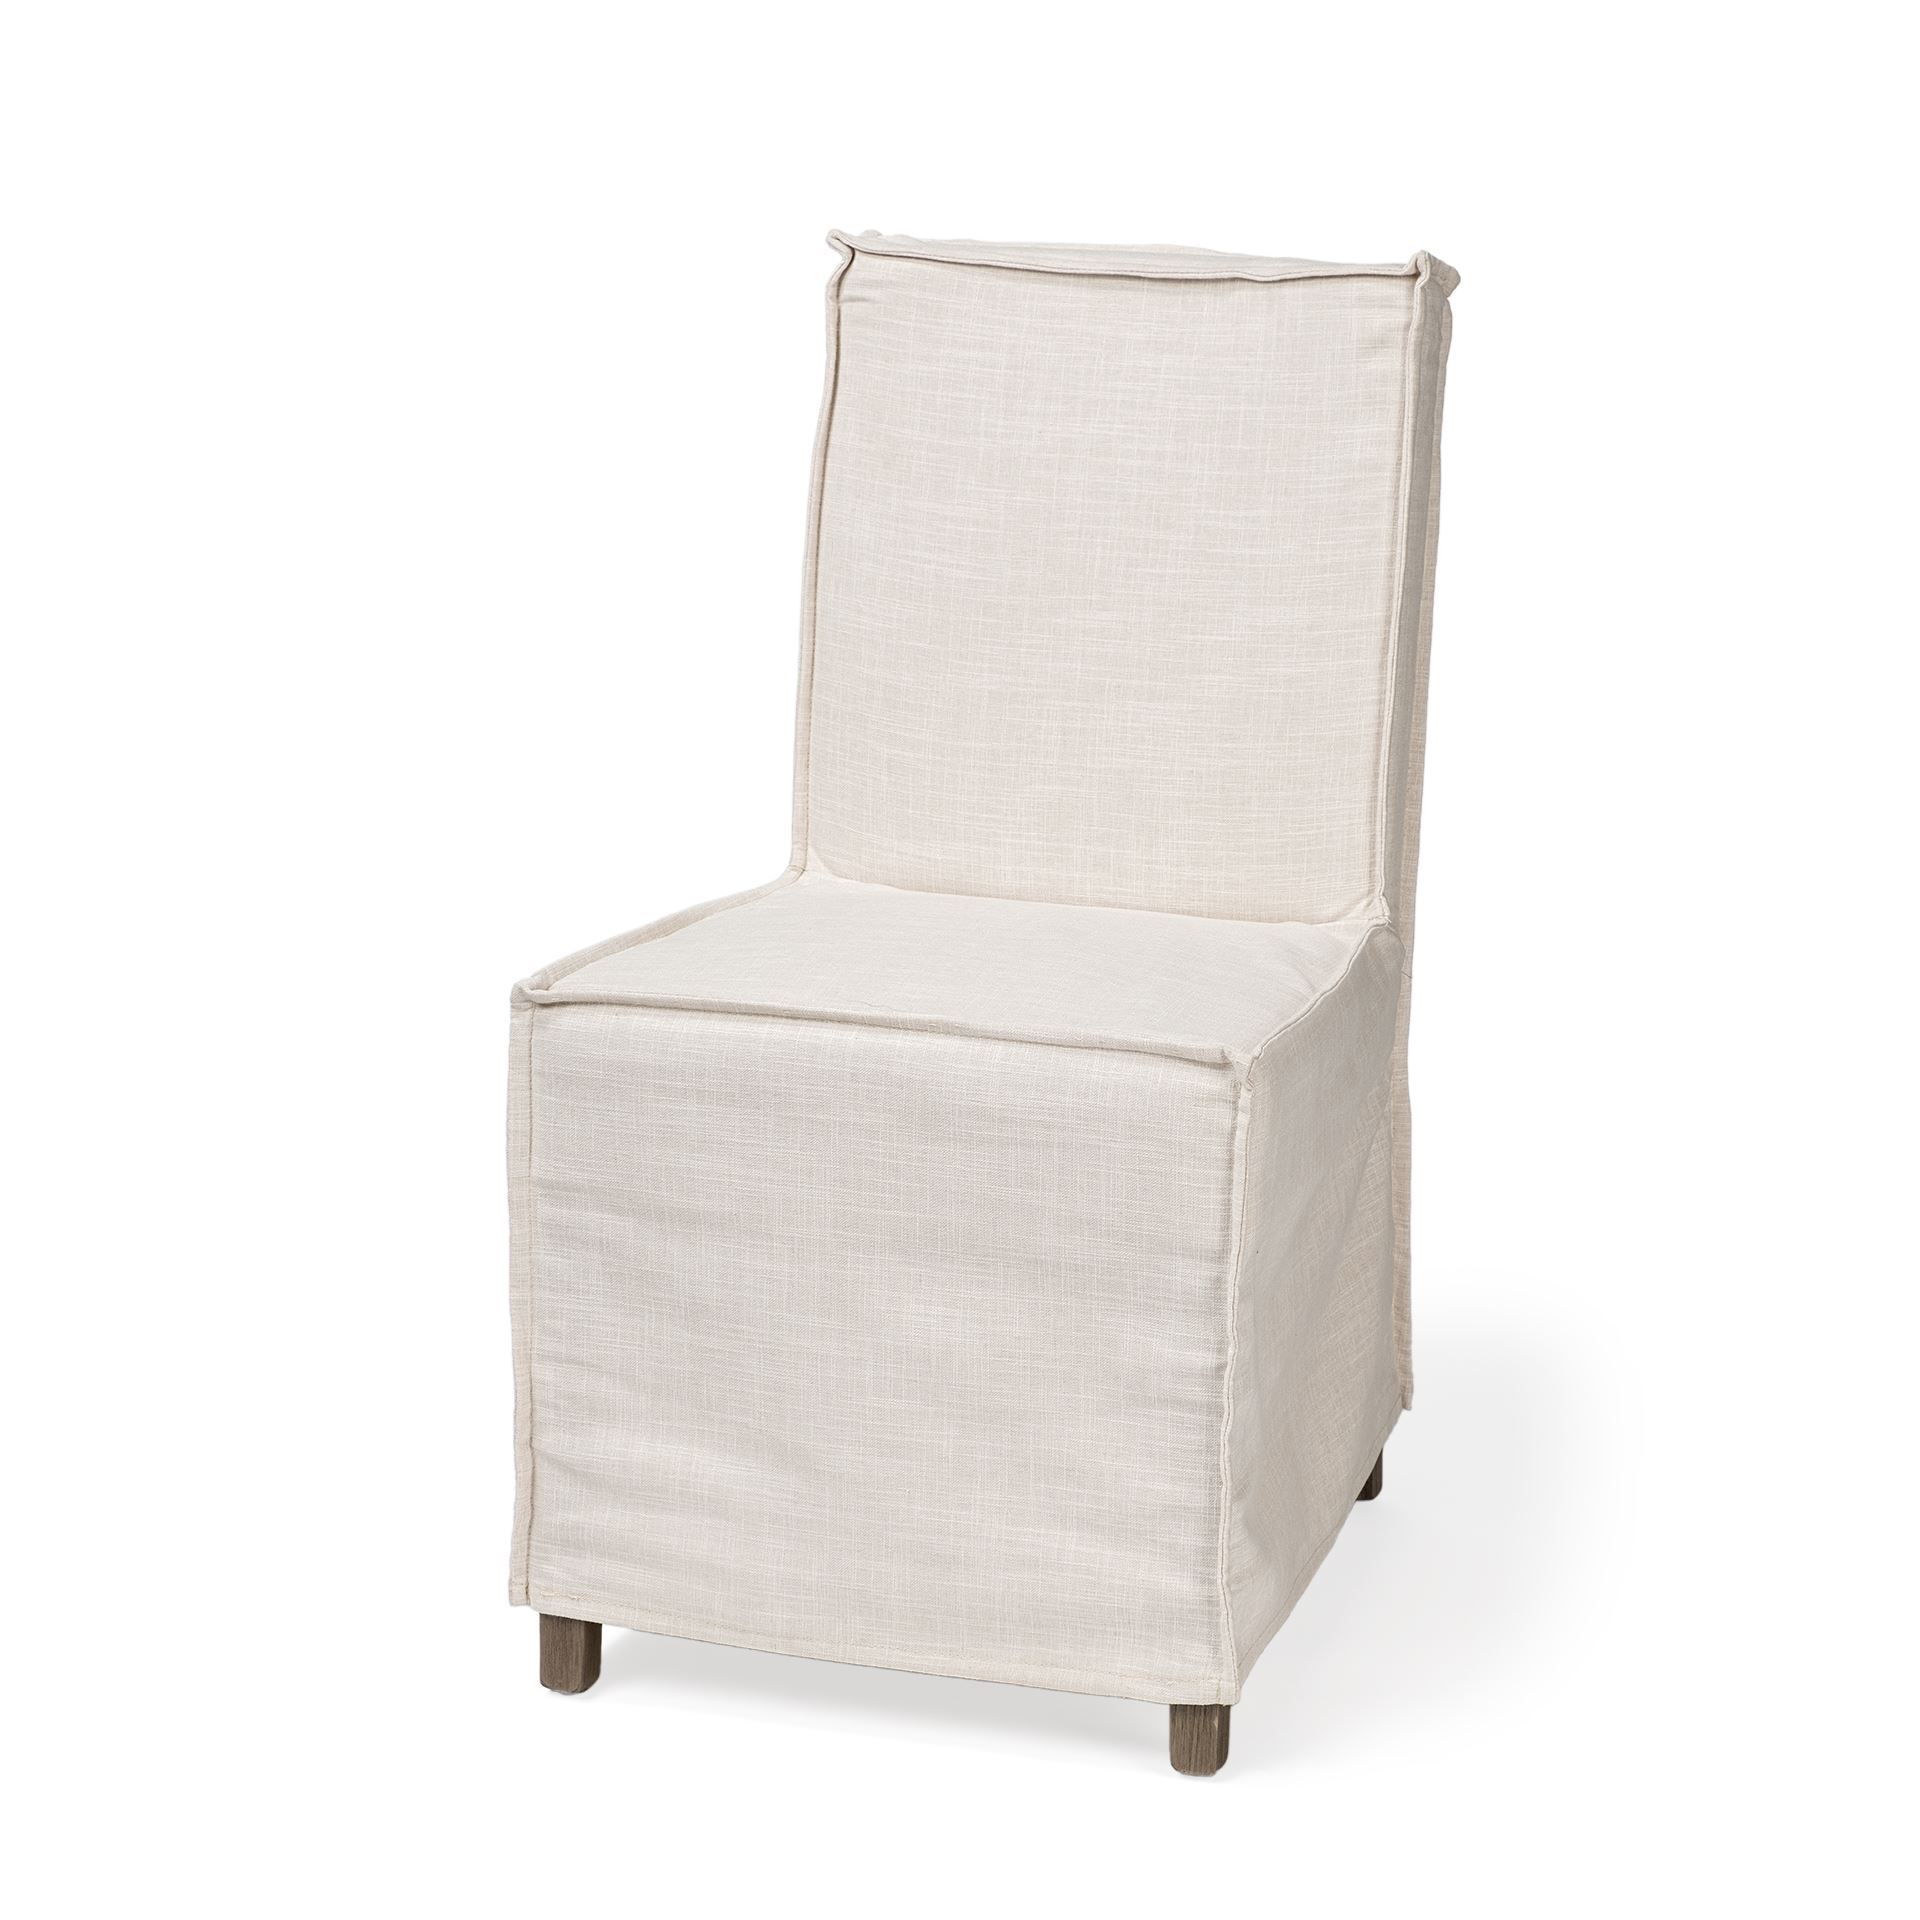 Cream Fabric Slip Cover with Brown Wooden Base Dining Chair